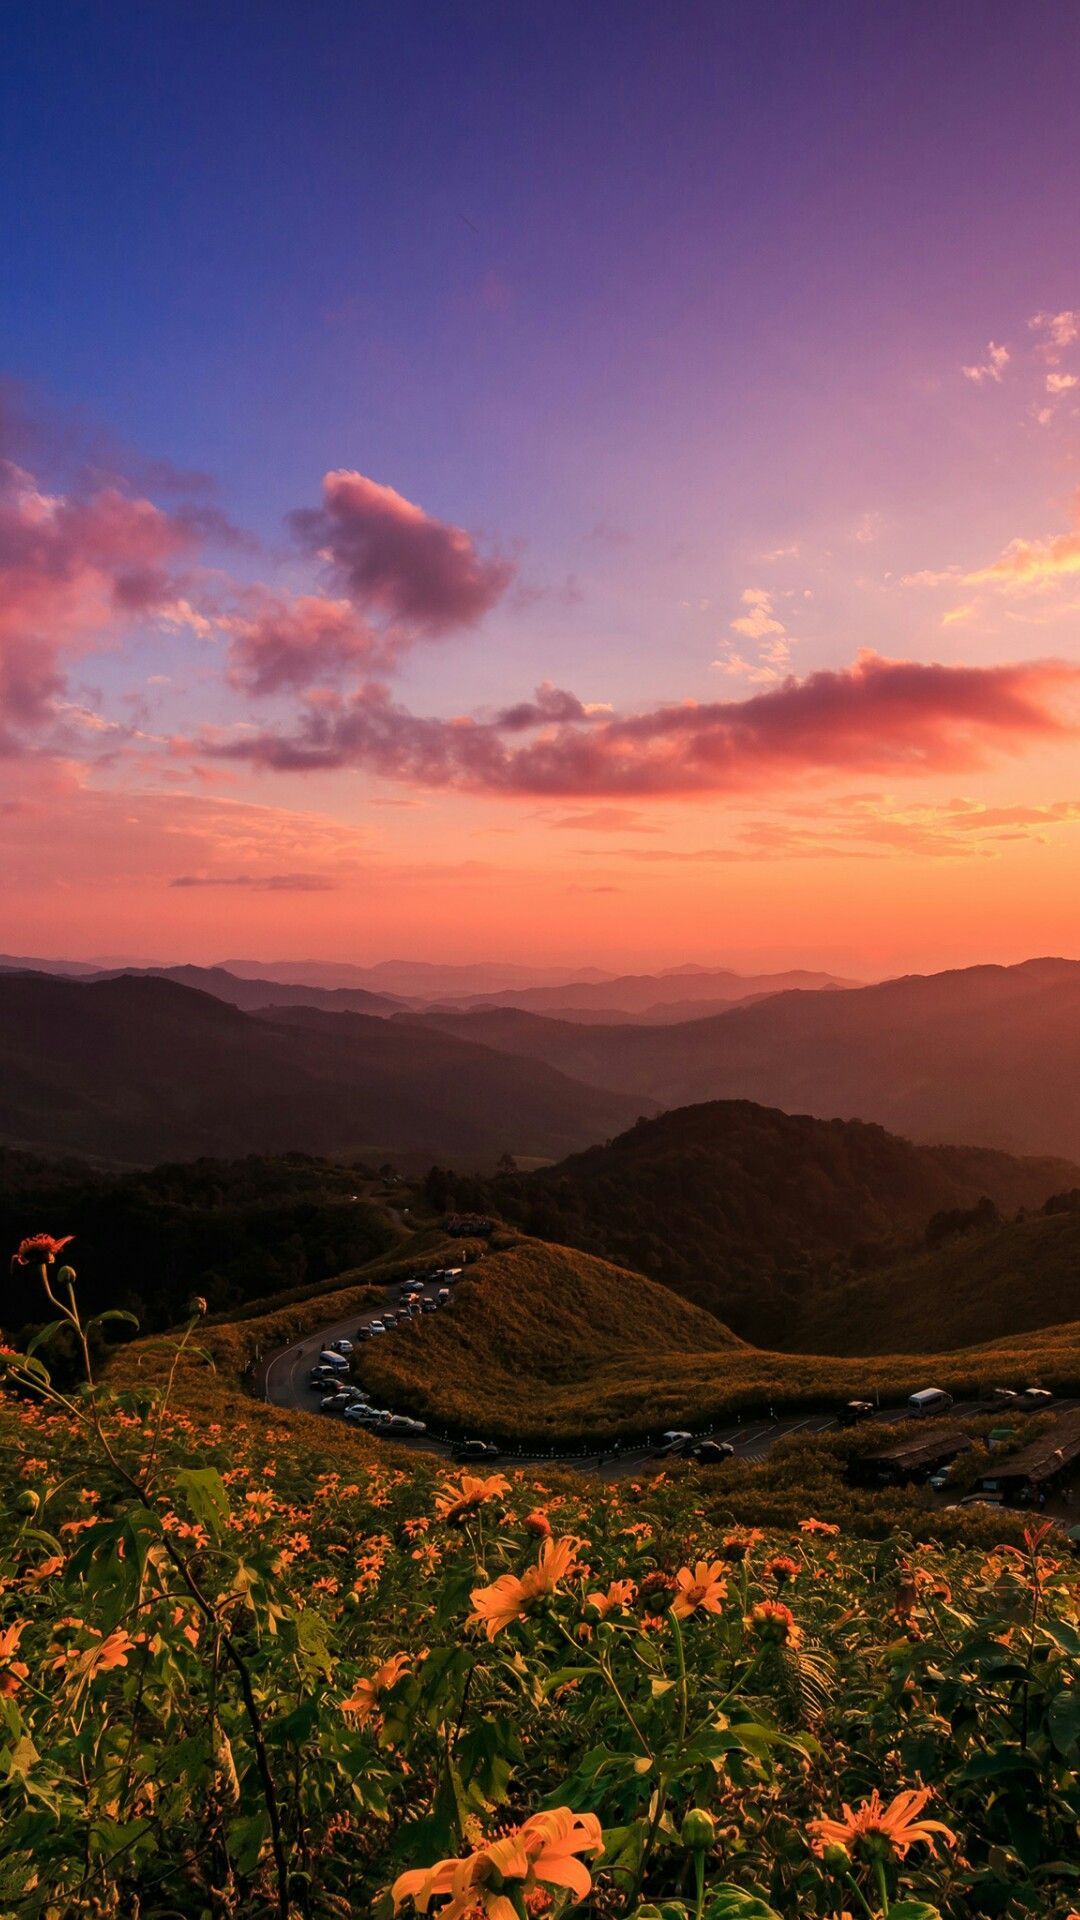 A sunset over the mountains with flowers - Landscape